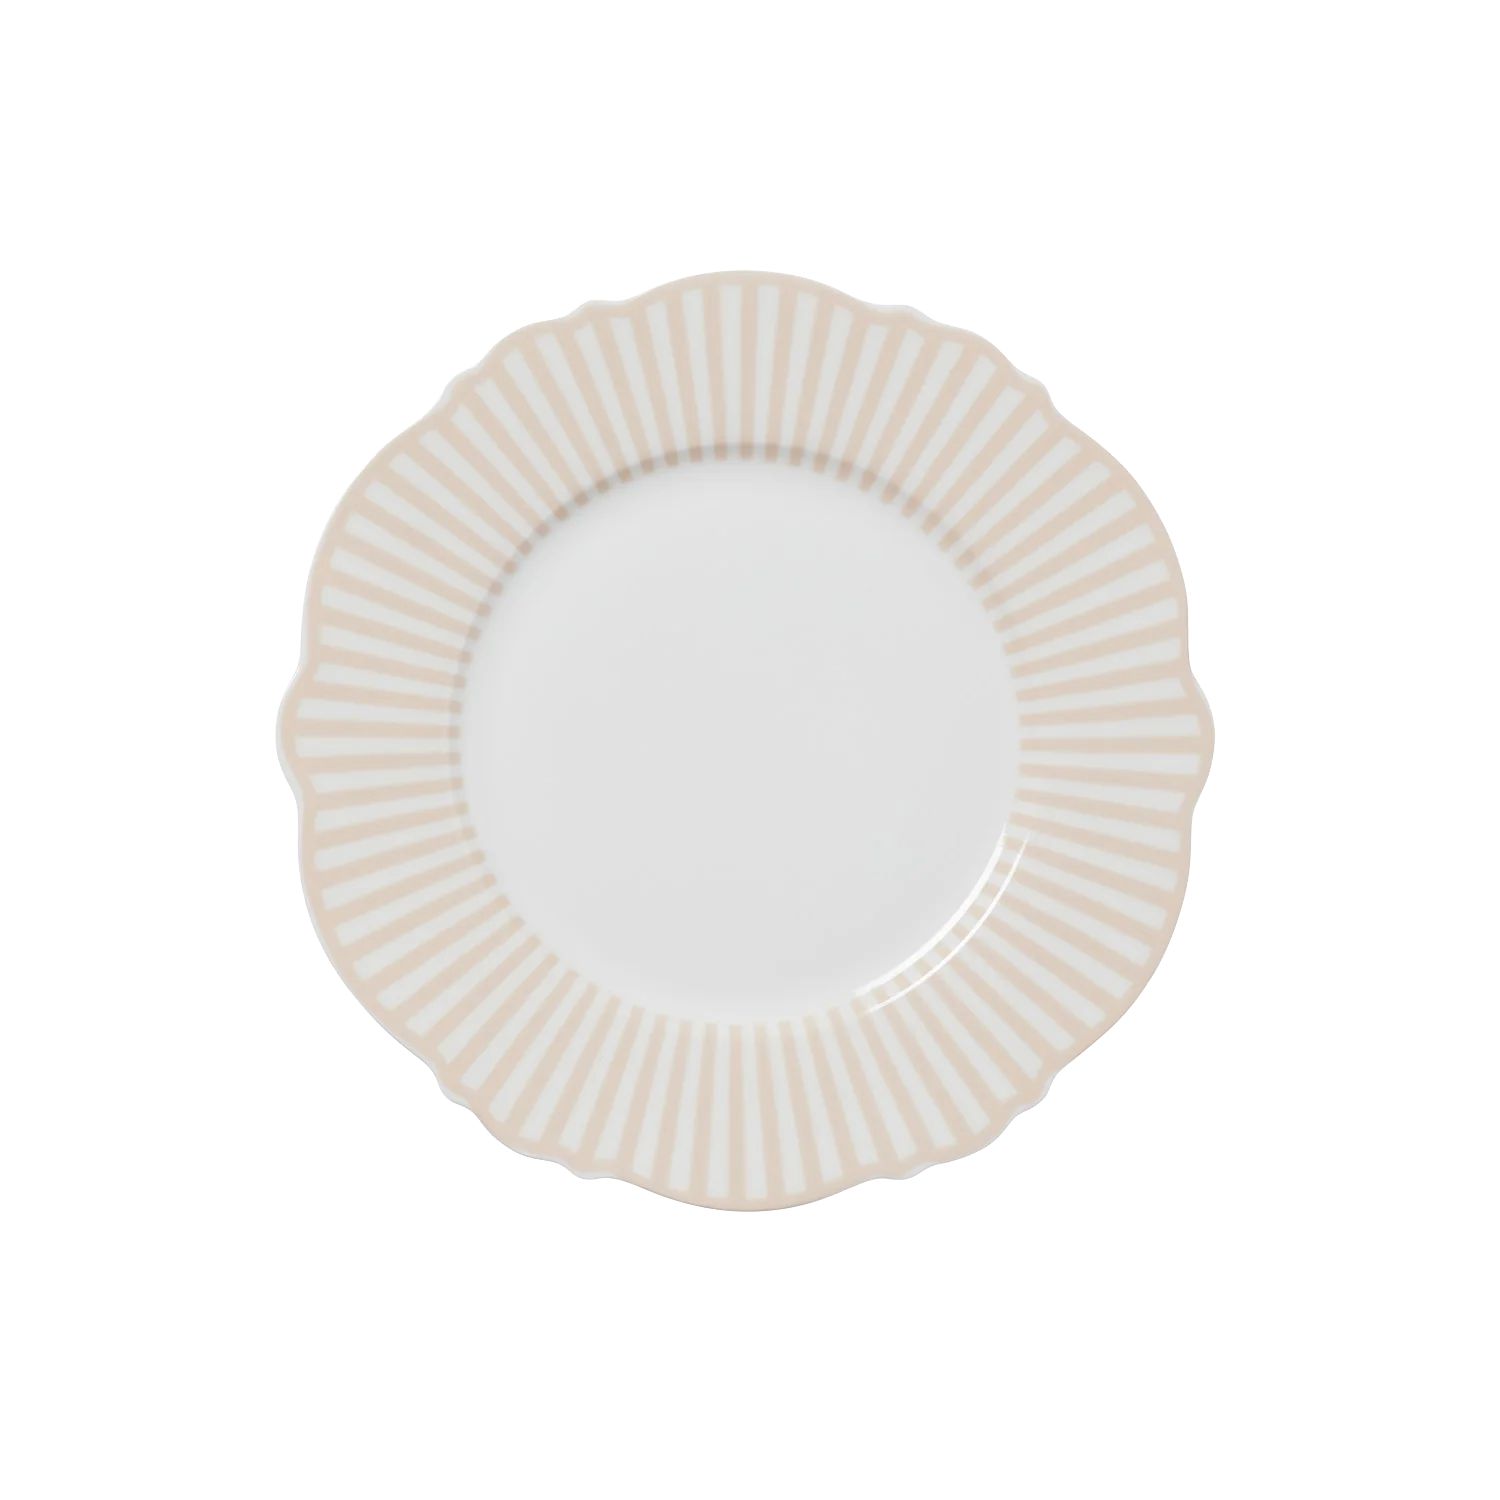 Beige Wave Side Plates - Set of 4 | In the Roundhouse